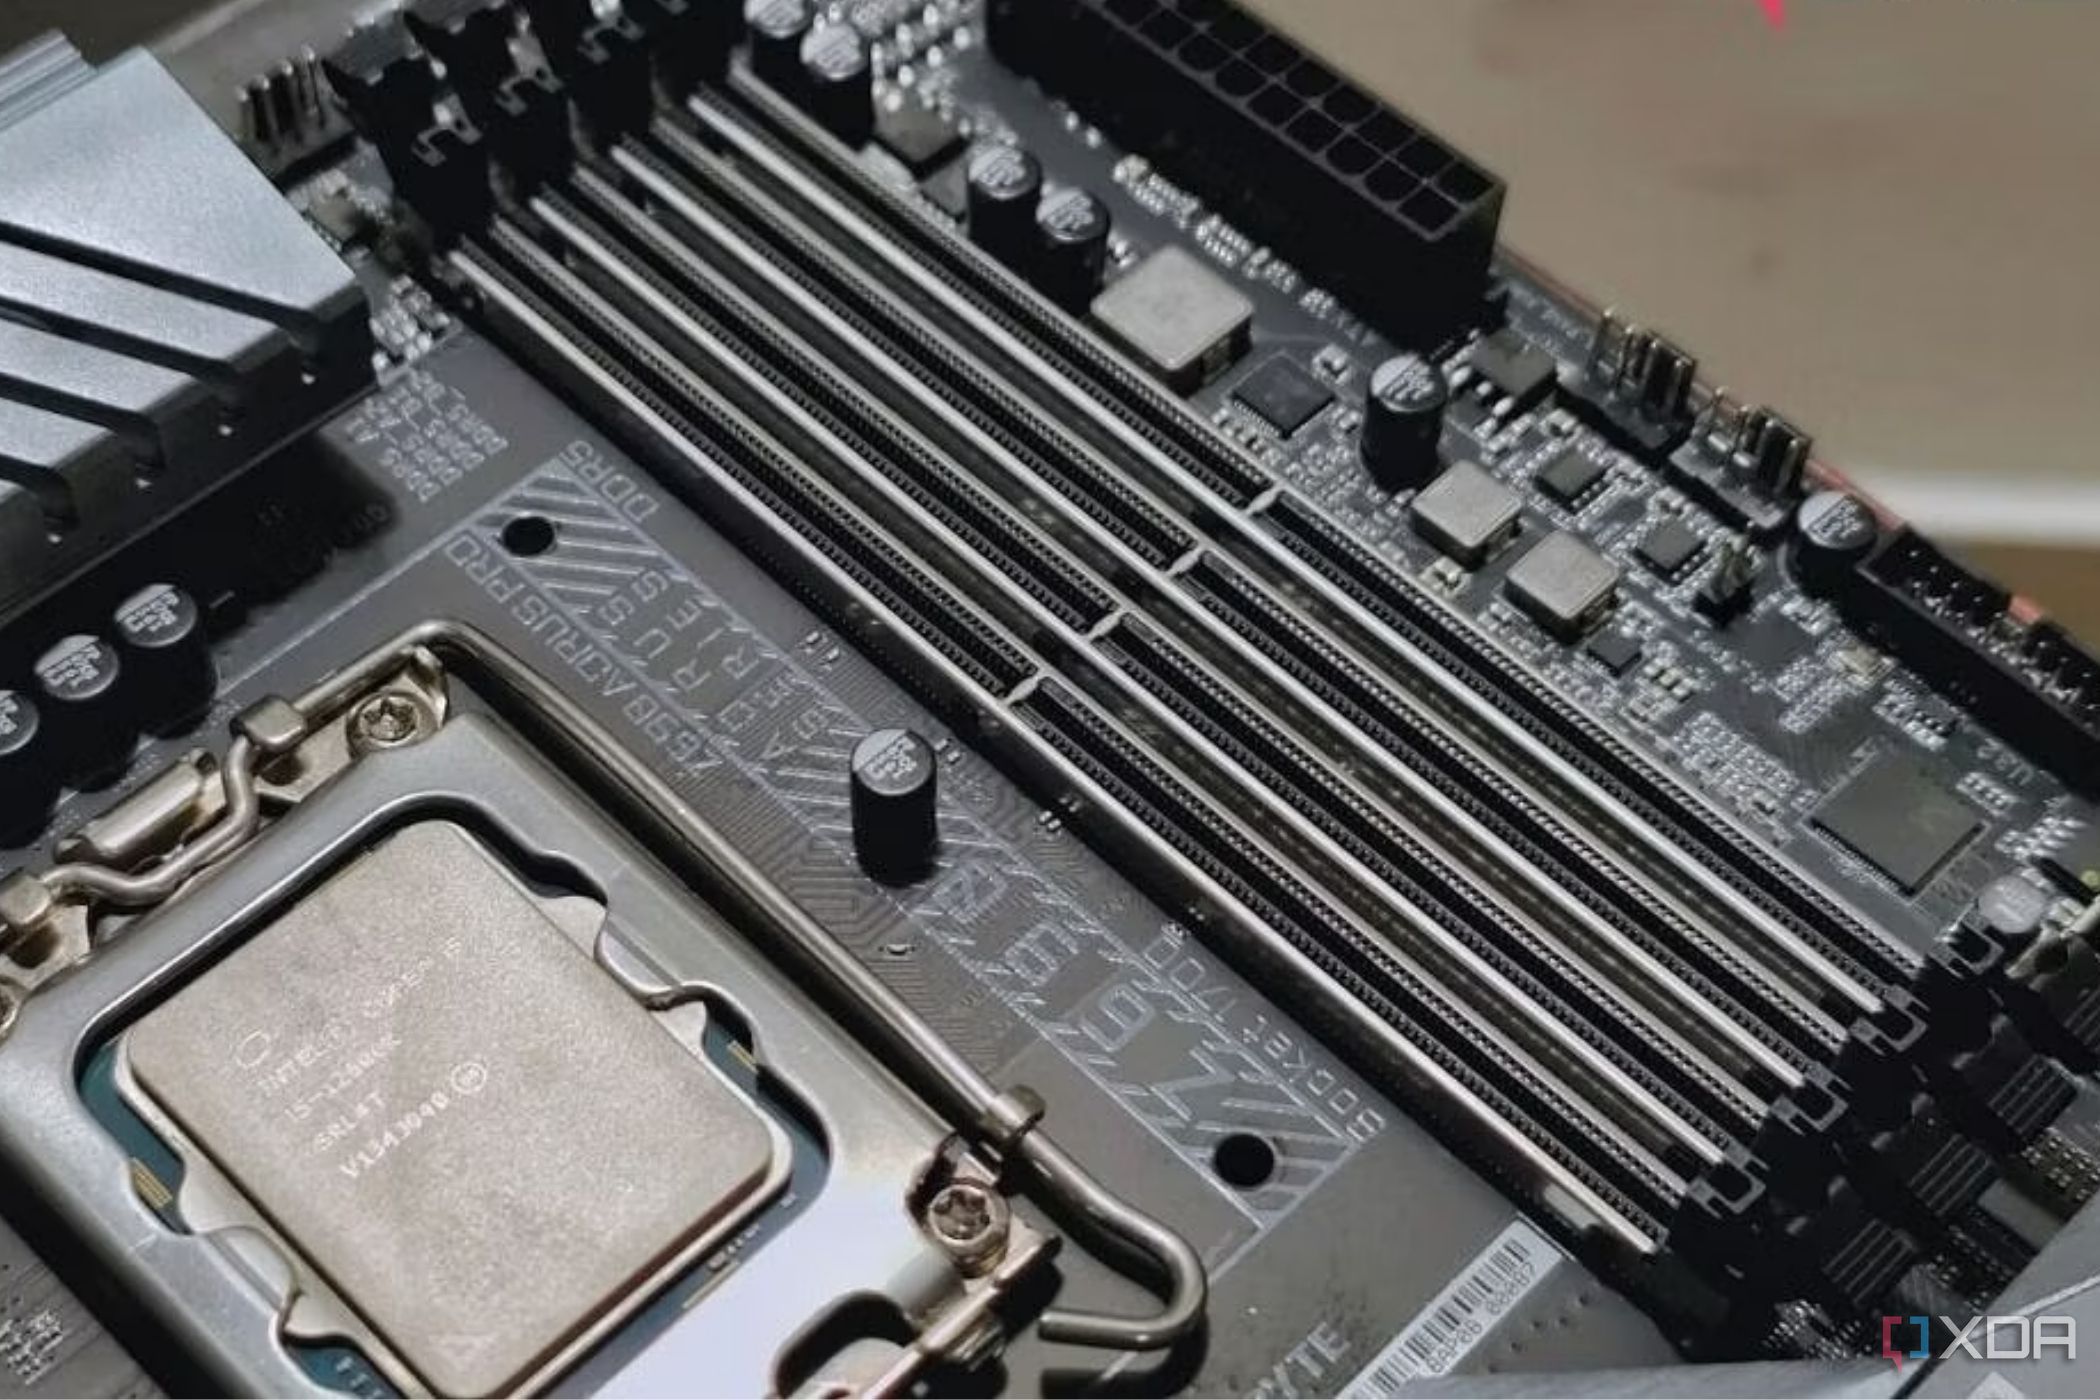 An image showing the memory slots on a motherboard.